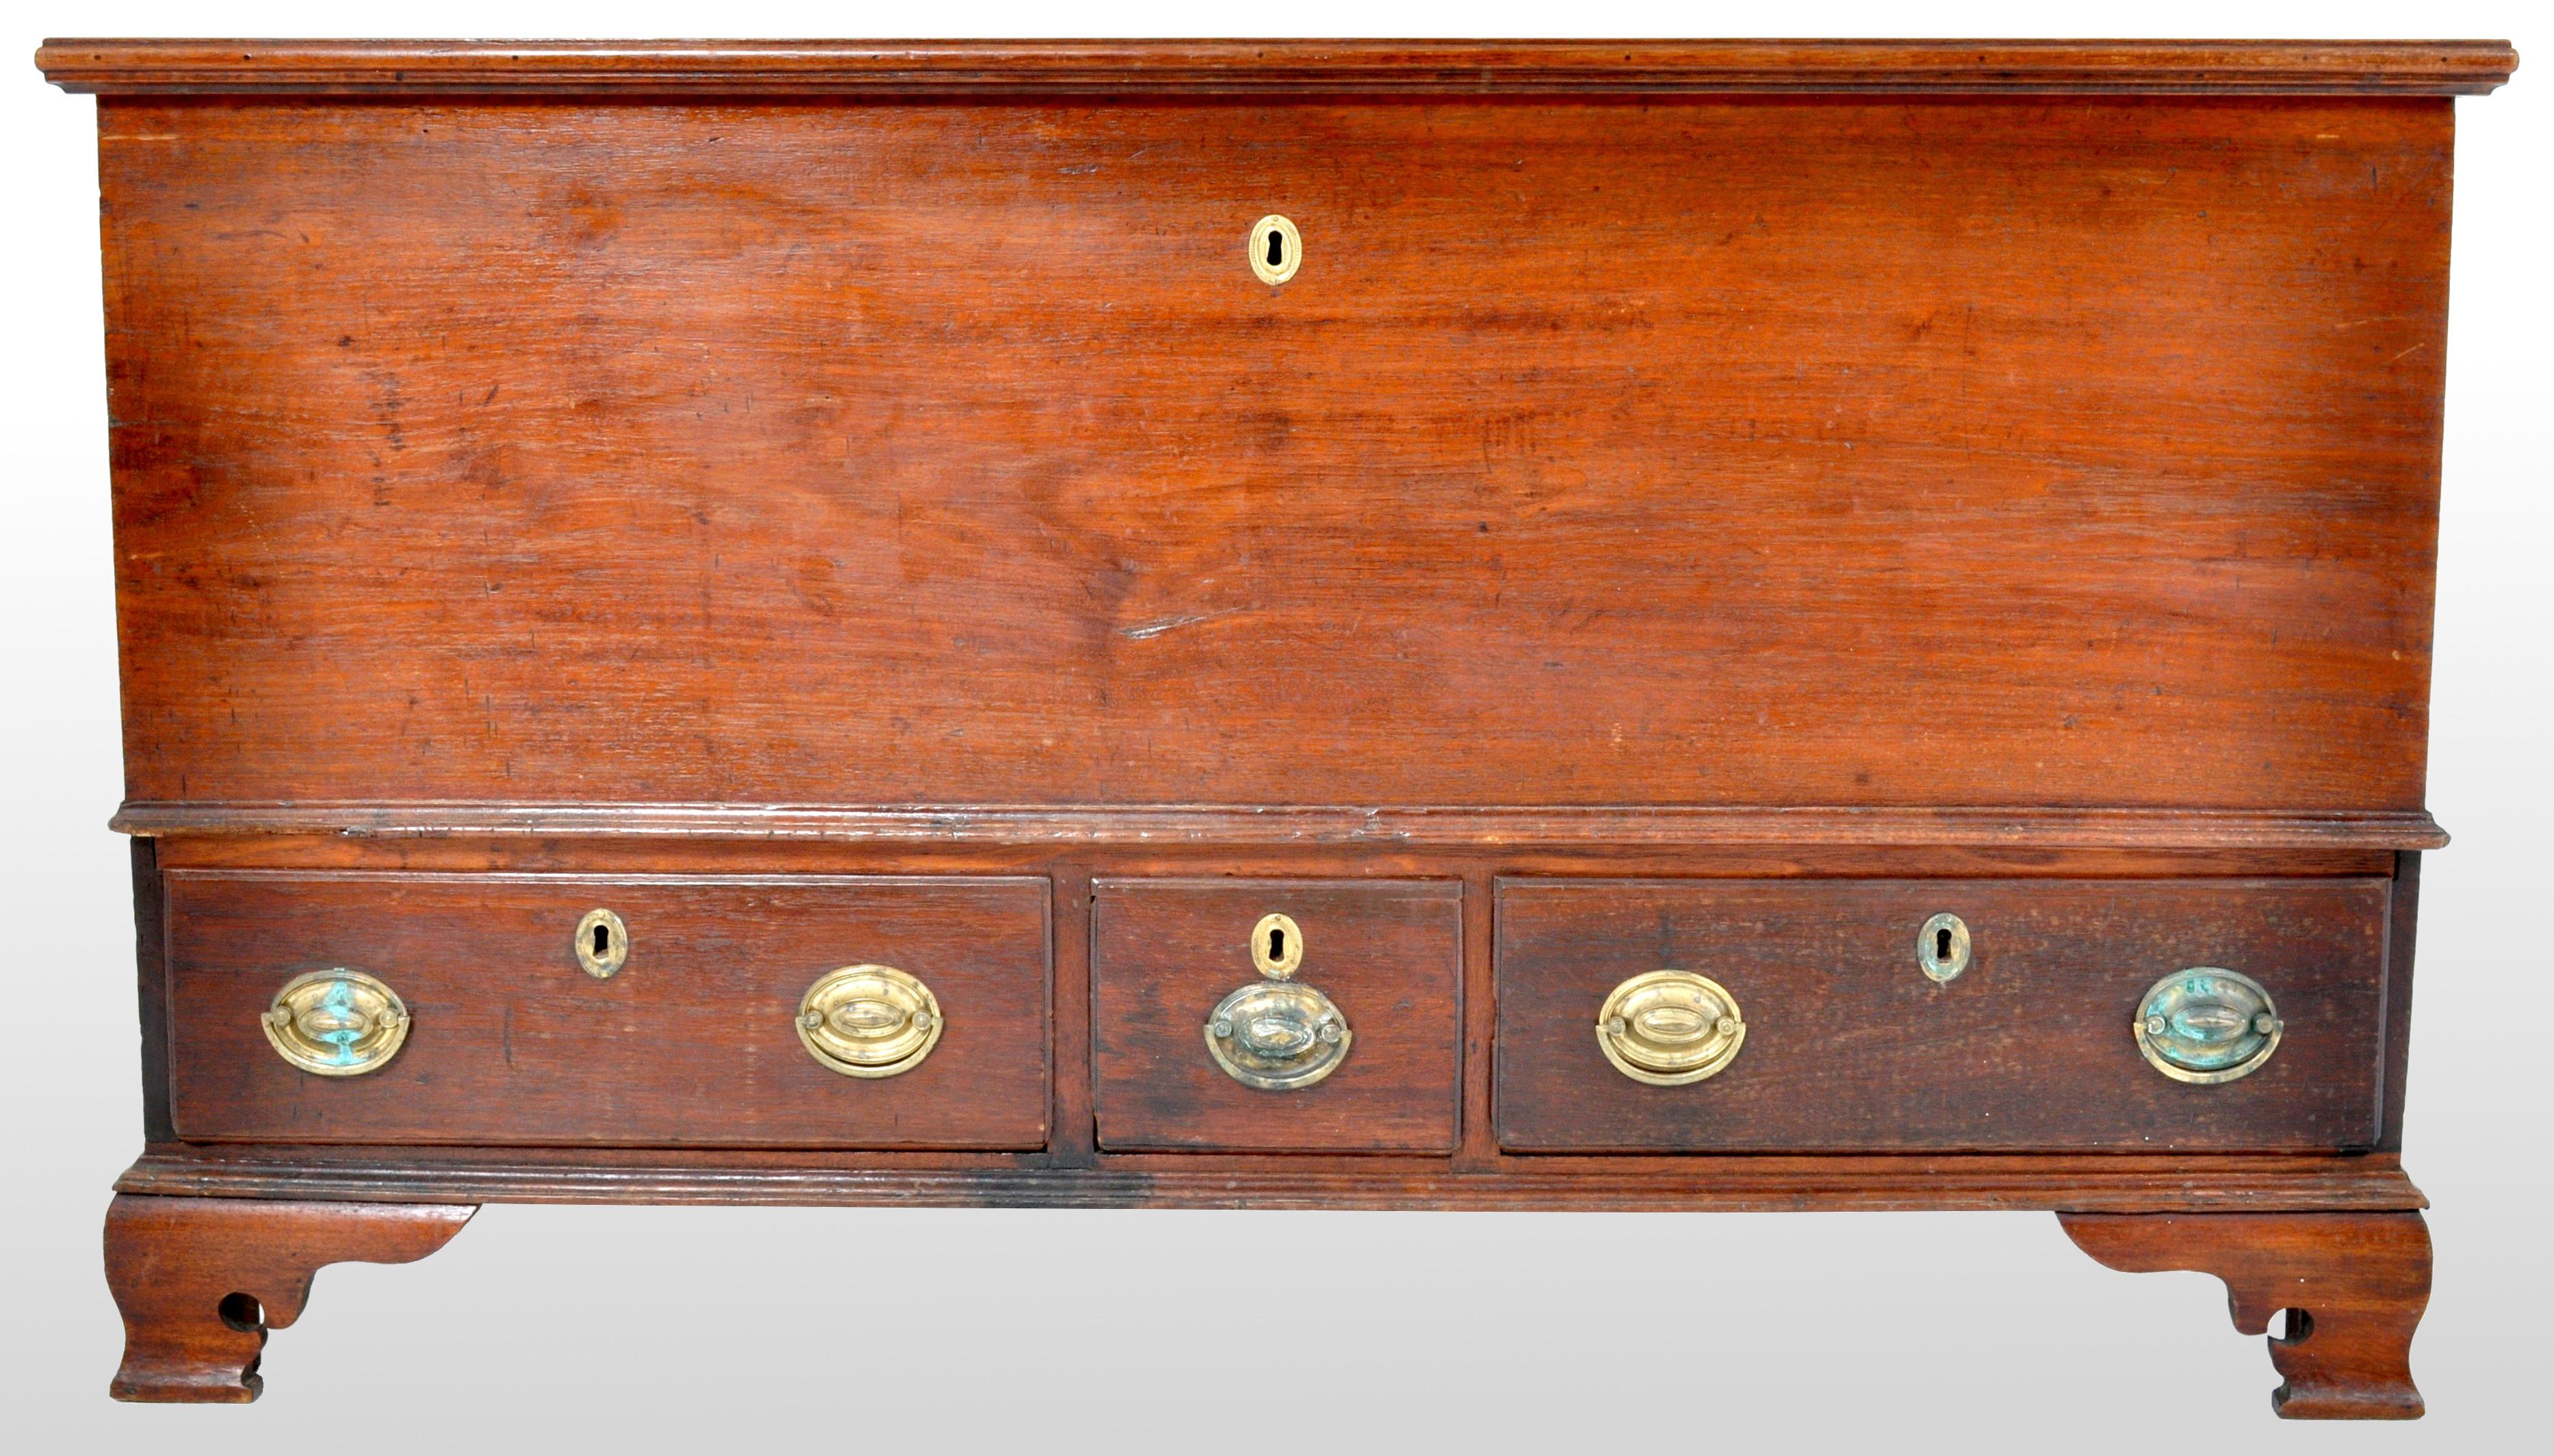 Antique American Federal Period, Chippendale, cherry mule chest, circa 1780. The chest originating from Pennsylvania and having a hinged lid enclosing a storage reservoir and a candle till to the left. The base having three drawers, two long and one